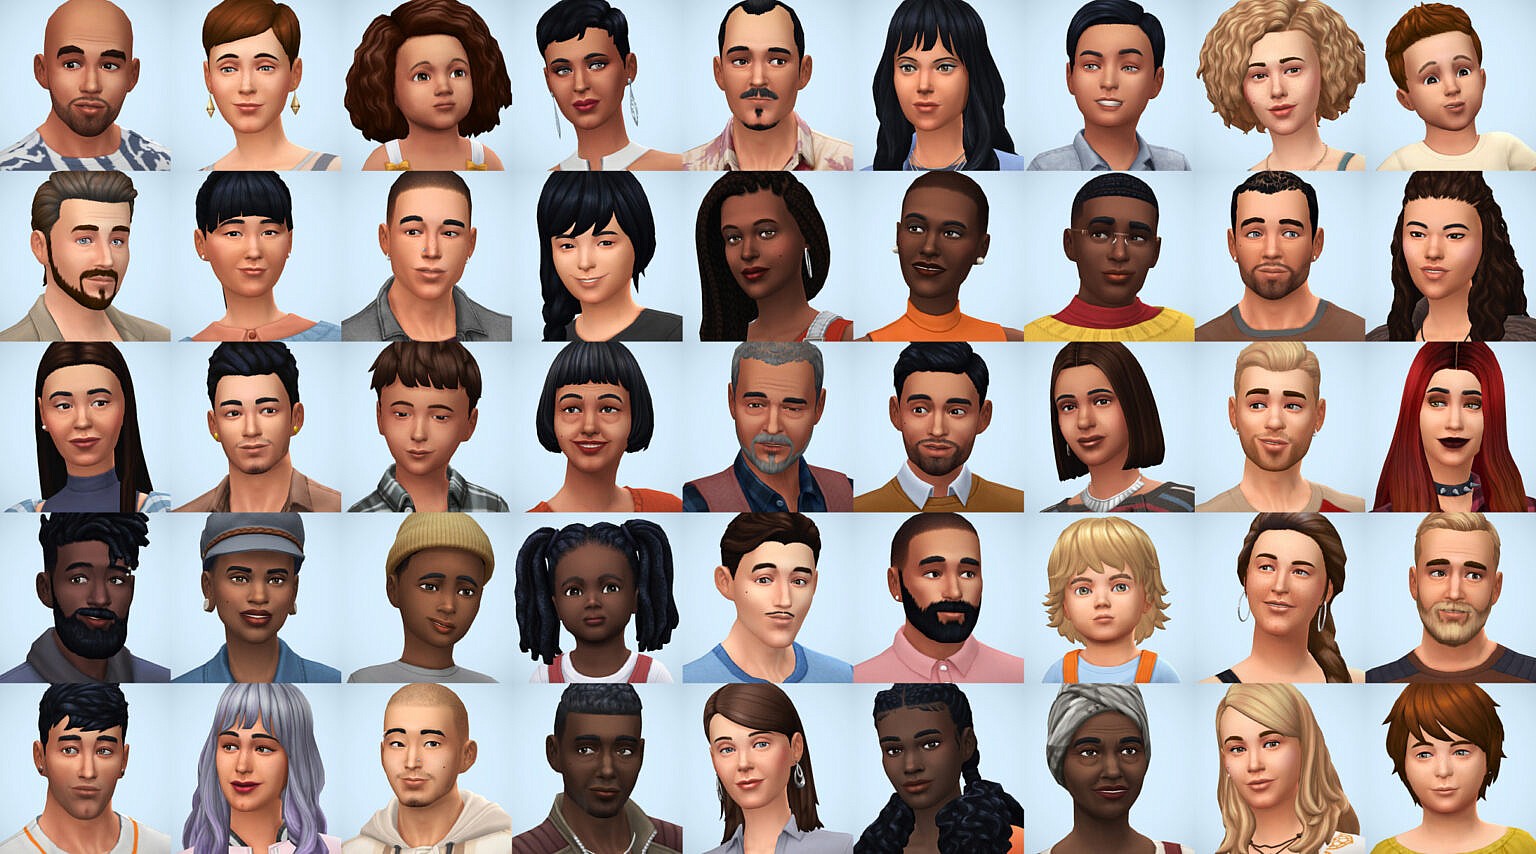 Sims 4 Sim Models Downloads Sims 4 Updates Page 38 Of 413